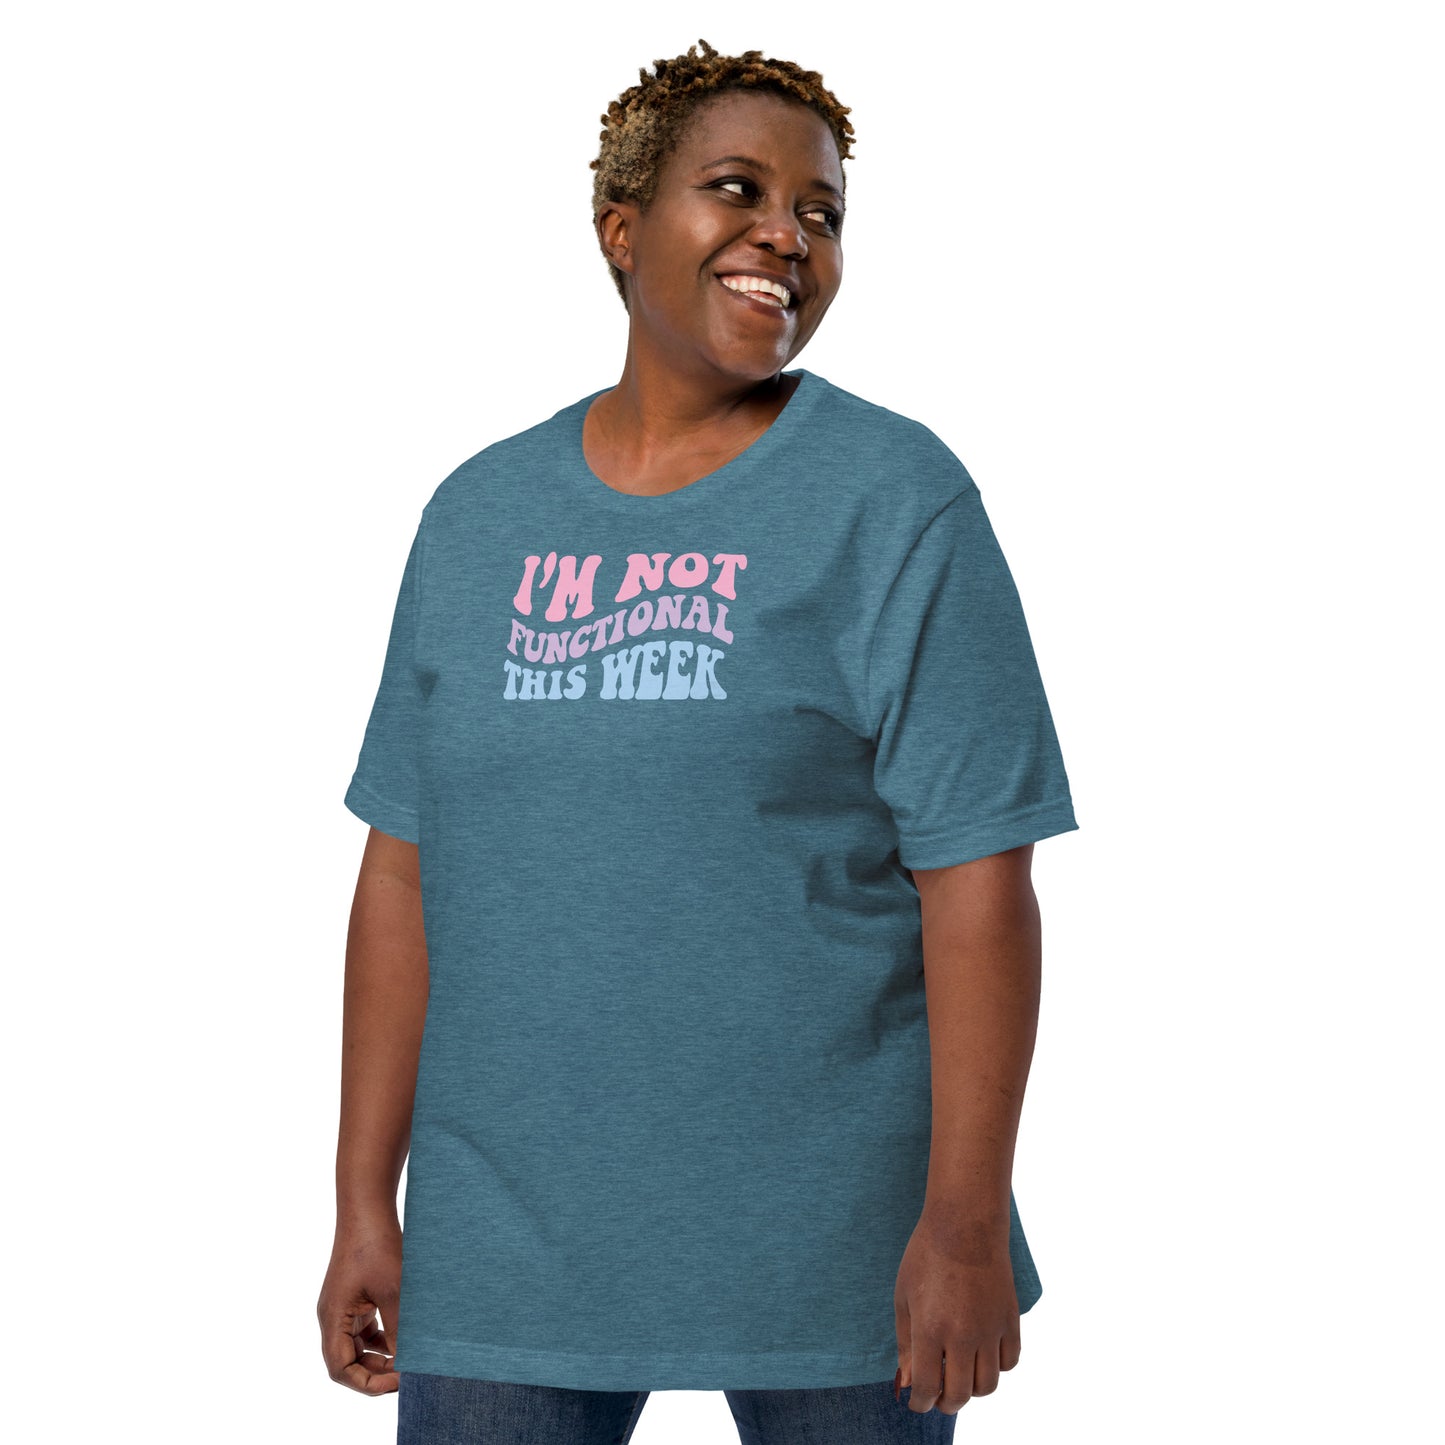 I'm Not Functional This Week Unisex T-shirt